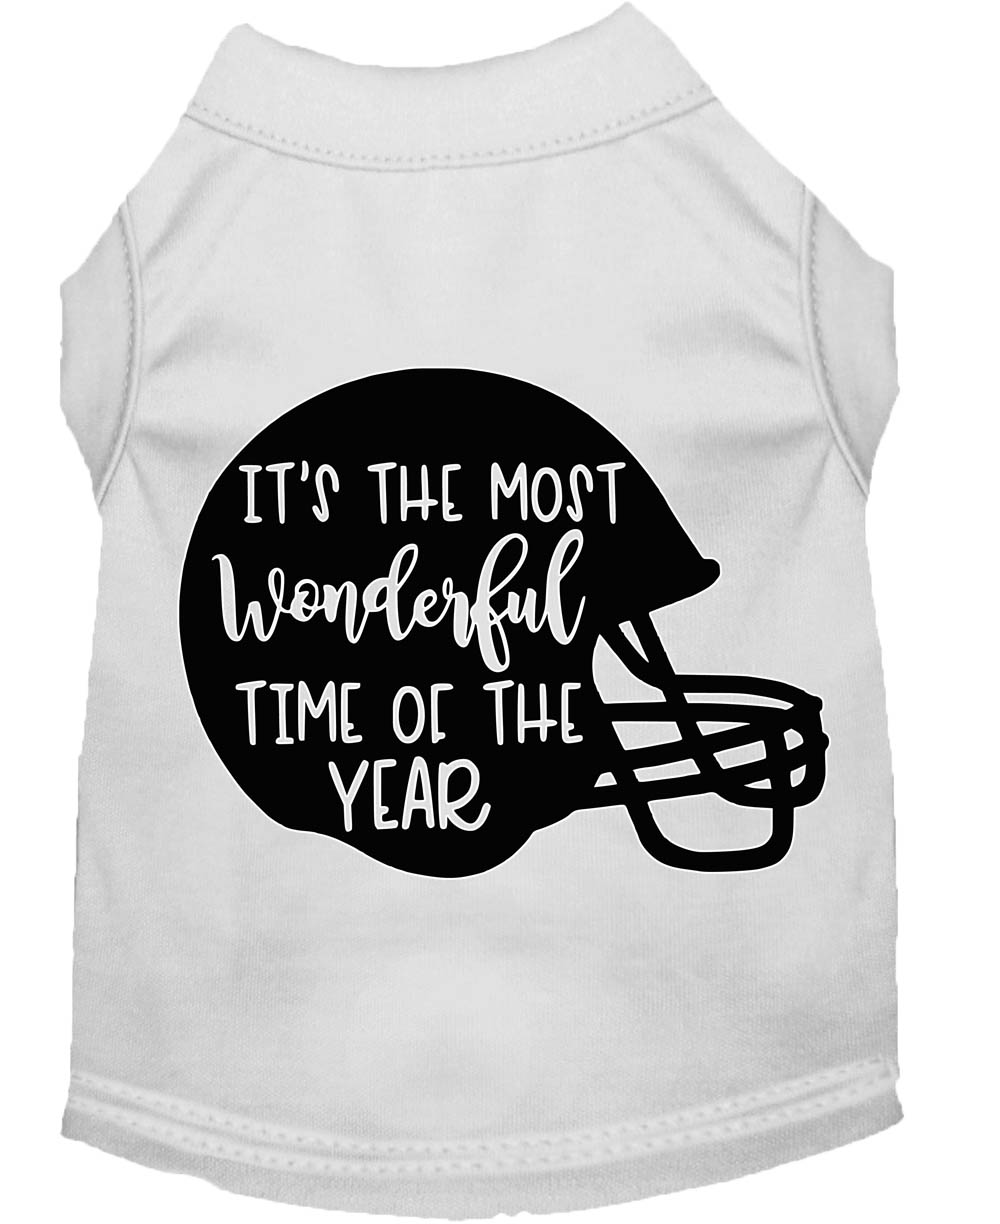 Most Wonderful Time of the Year (Football) Screen Print Dog Shirt White XL